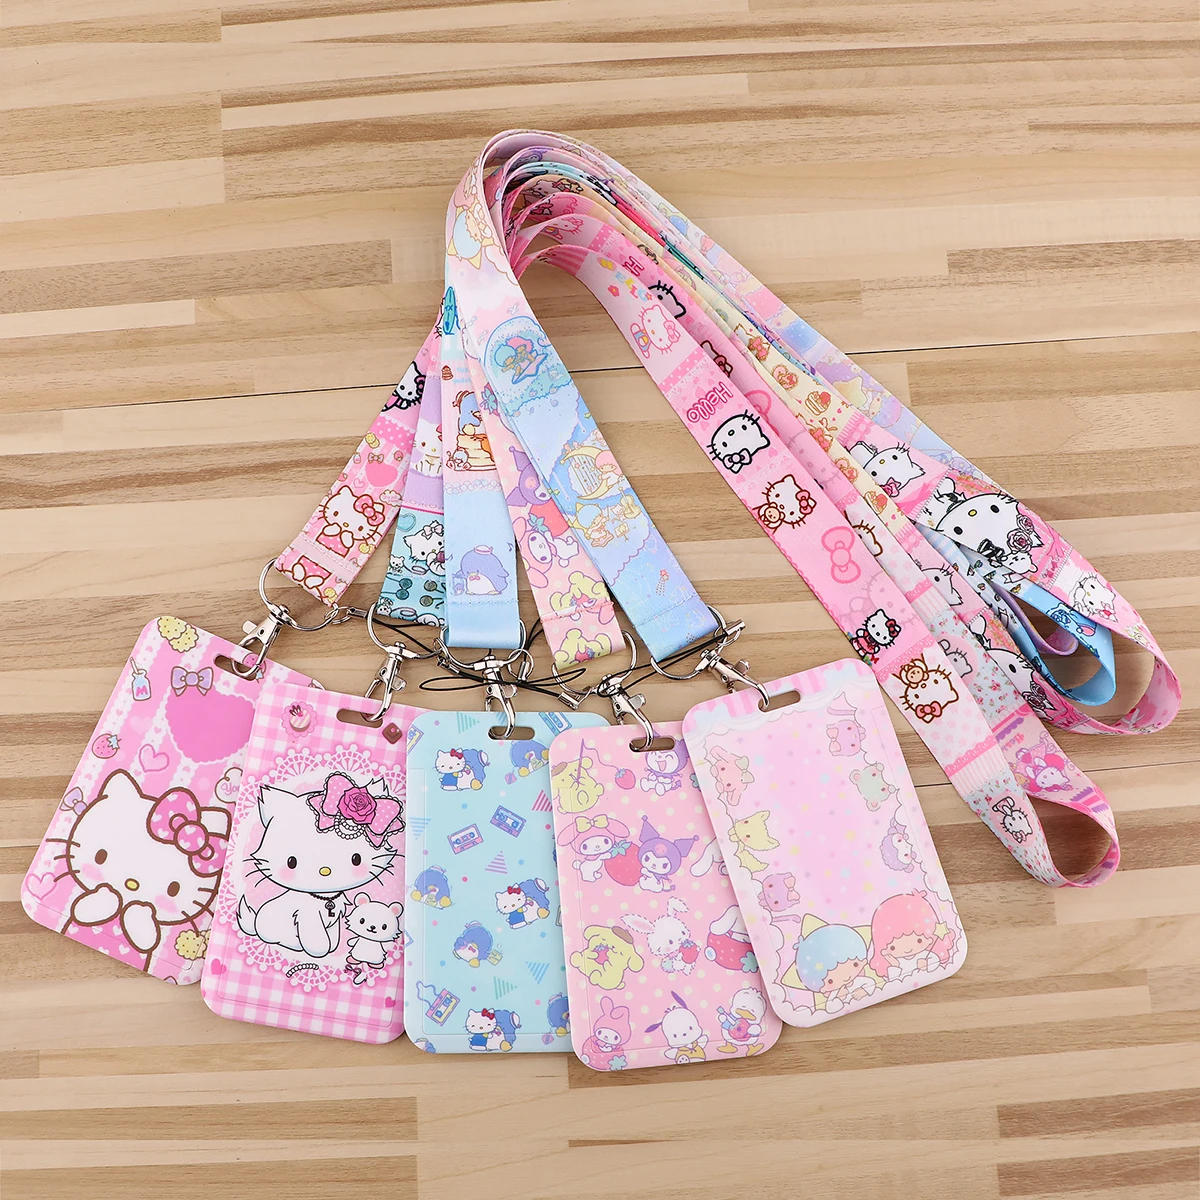 Rabbit Keychain Kawaii Cat Cartoon Anime Lanyards for Key ID Card Gym Cell Phone Strap USB Badge Holder Accessories Gift daisy flowers sunflowers art cartoon anime fashion lanyards bus id name work card holder accessories decorations kids gifts